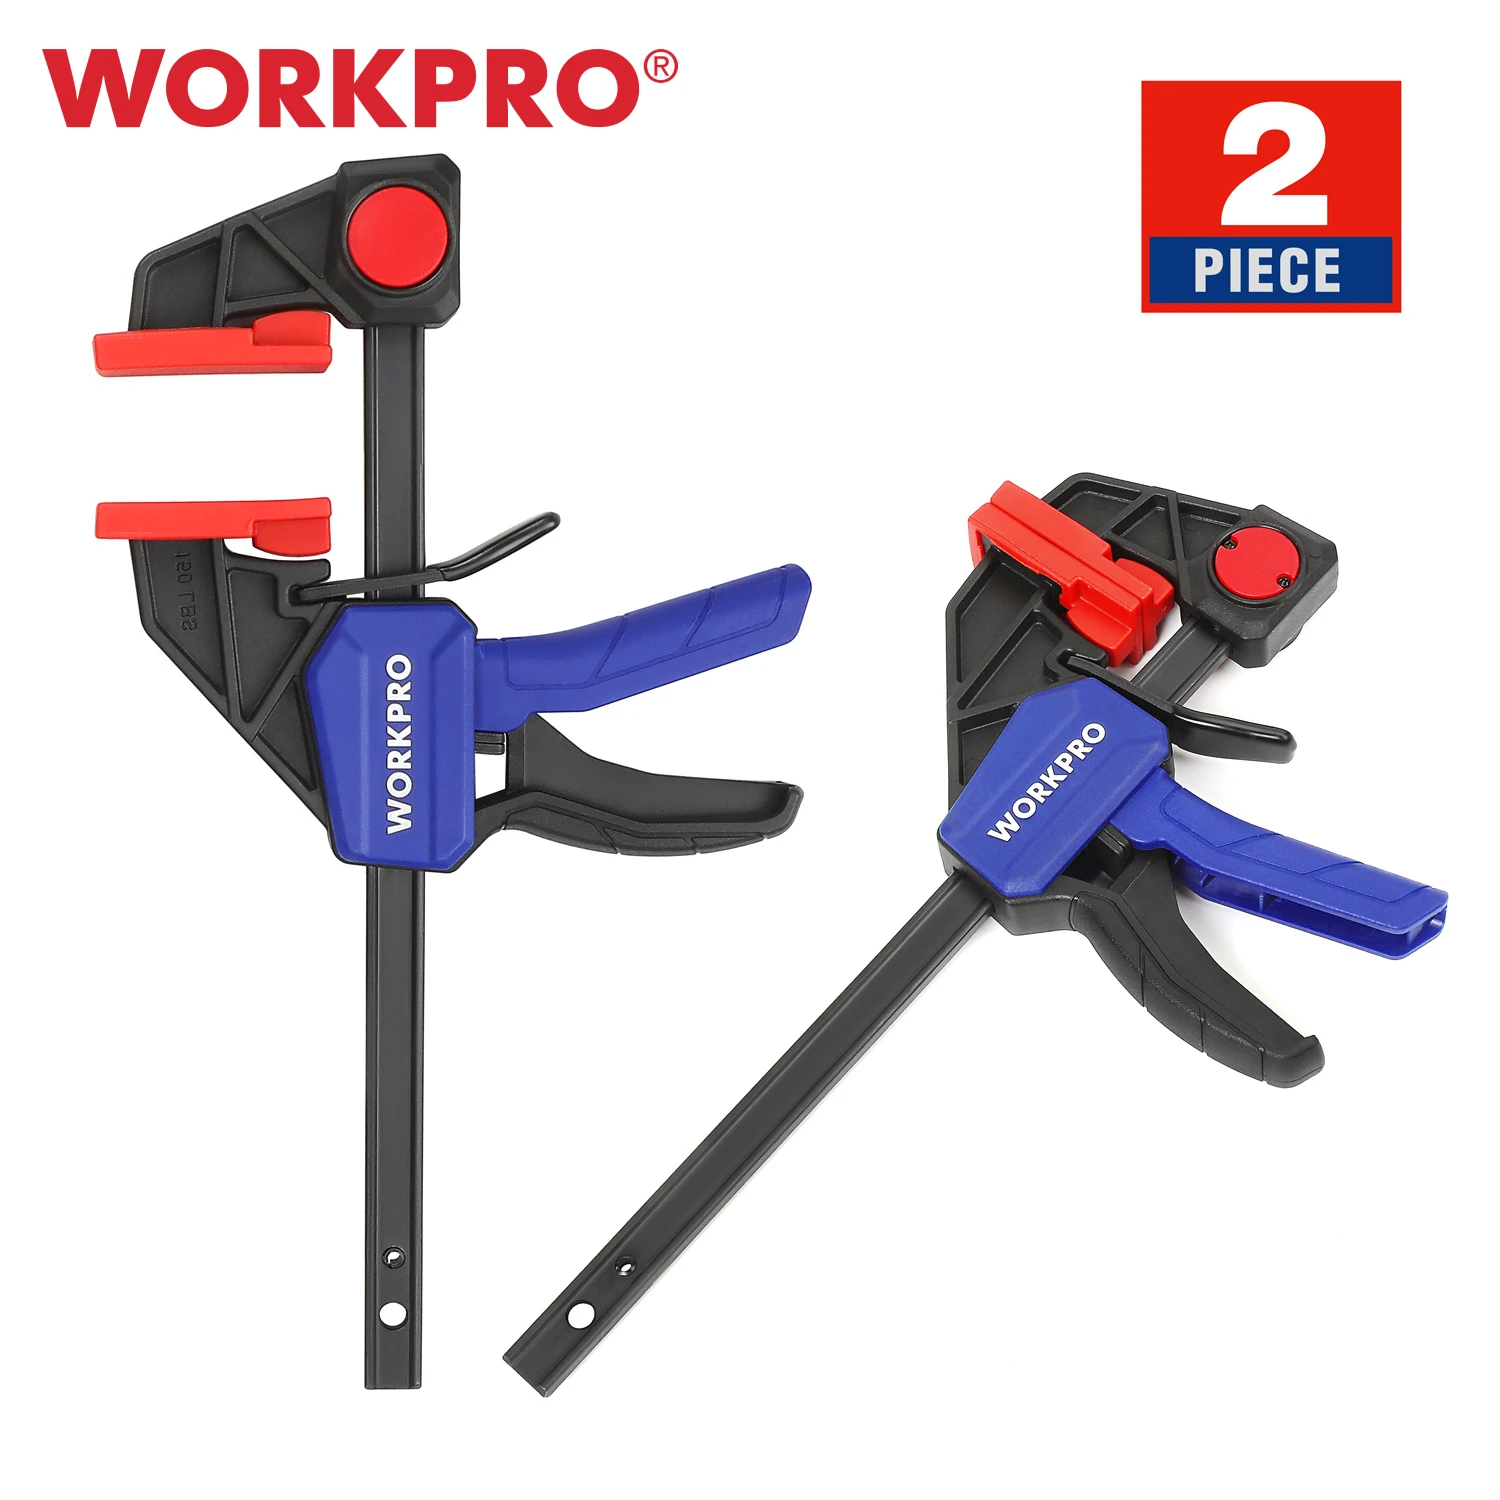 WORKPRO 6"/150mm 1/2PC Quick Ratchet F Clamps For Woodworking Carpentry Clamp One-Handed Heavy Duty Bar Clamp Wood Clip Kit Tool